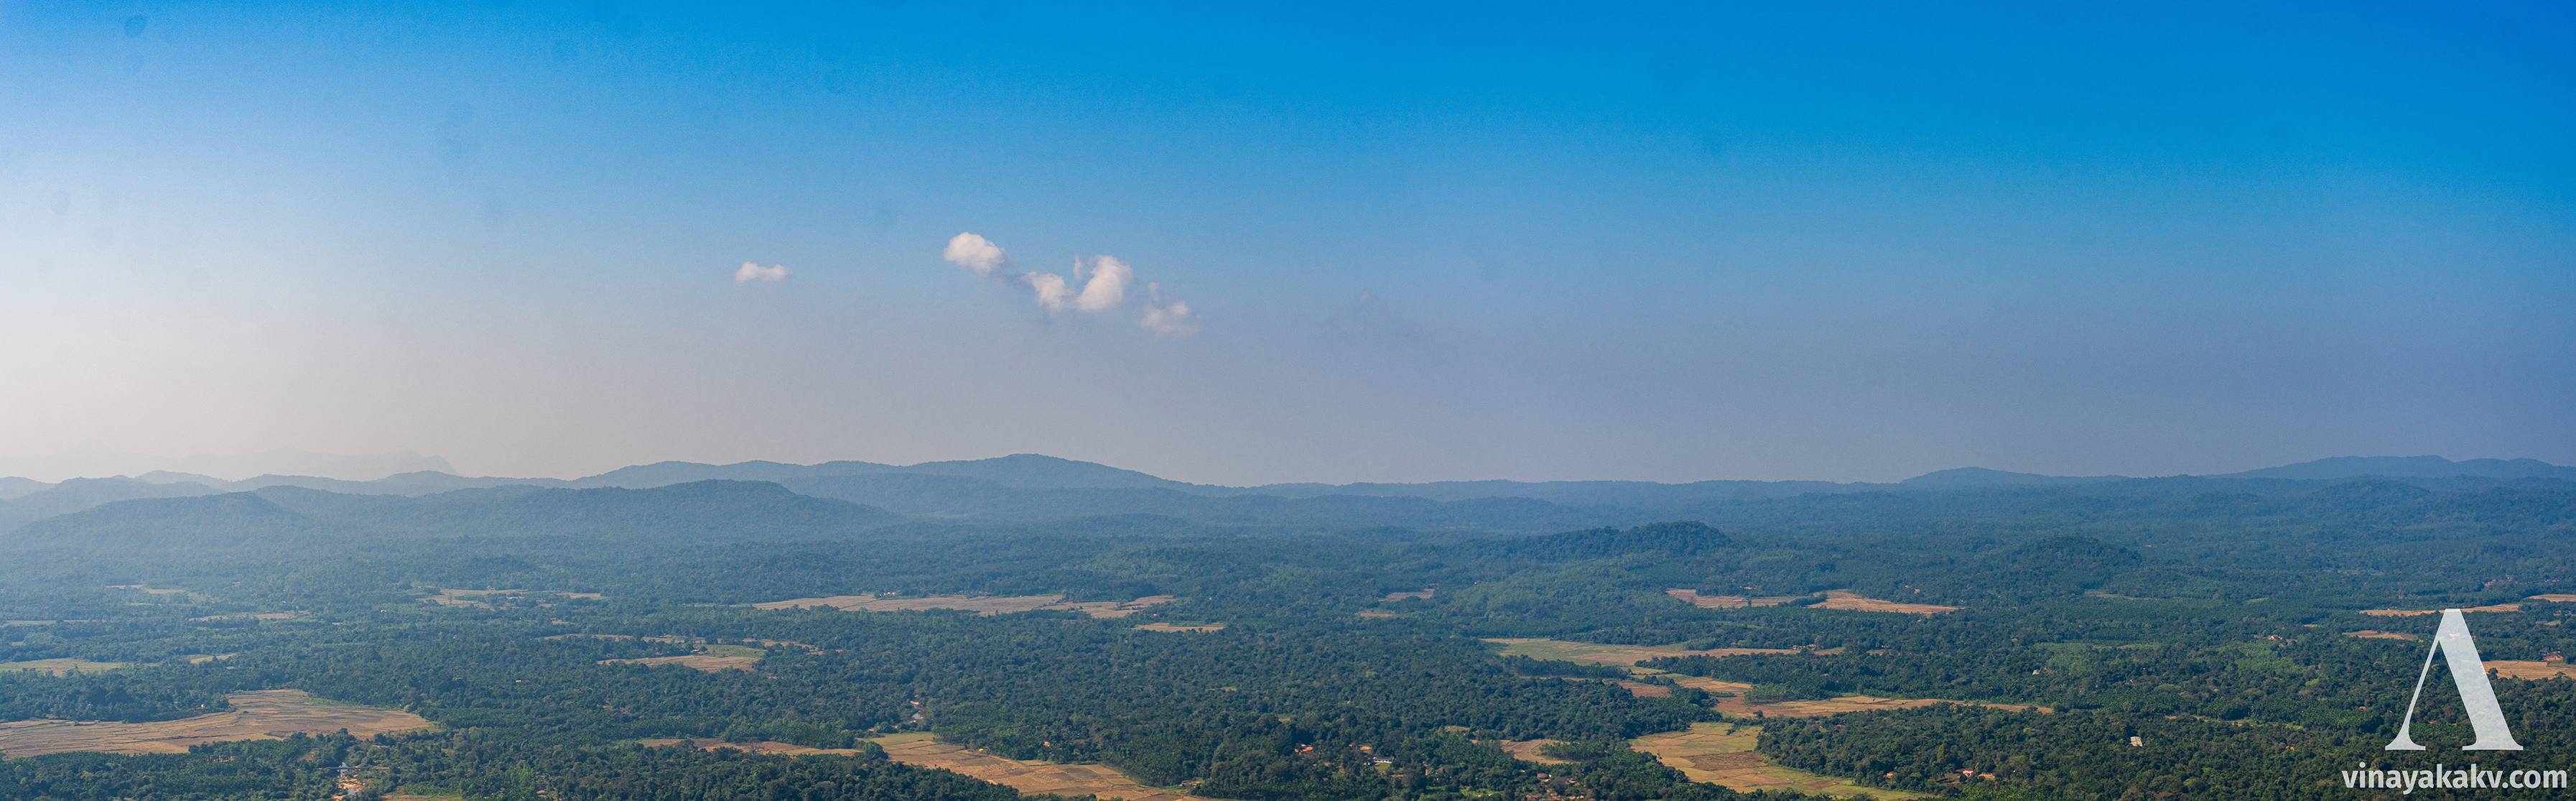 View from *Kundadri* on hazy day. The photo is processed to make the effect of haze appear less. The tower of Agumbe ghat is at the center of the photo and barely visible.